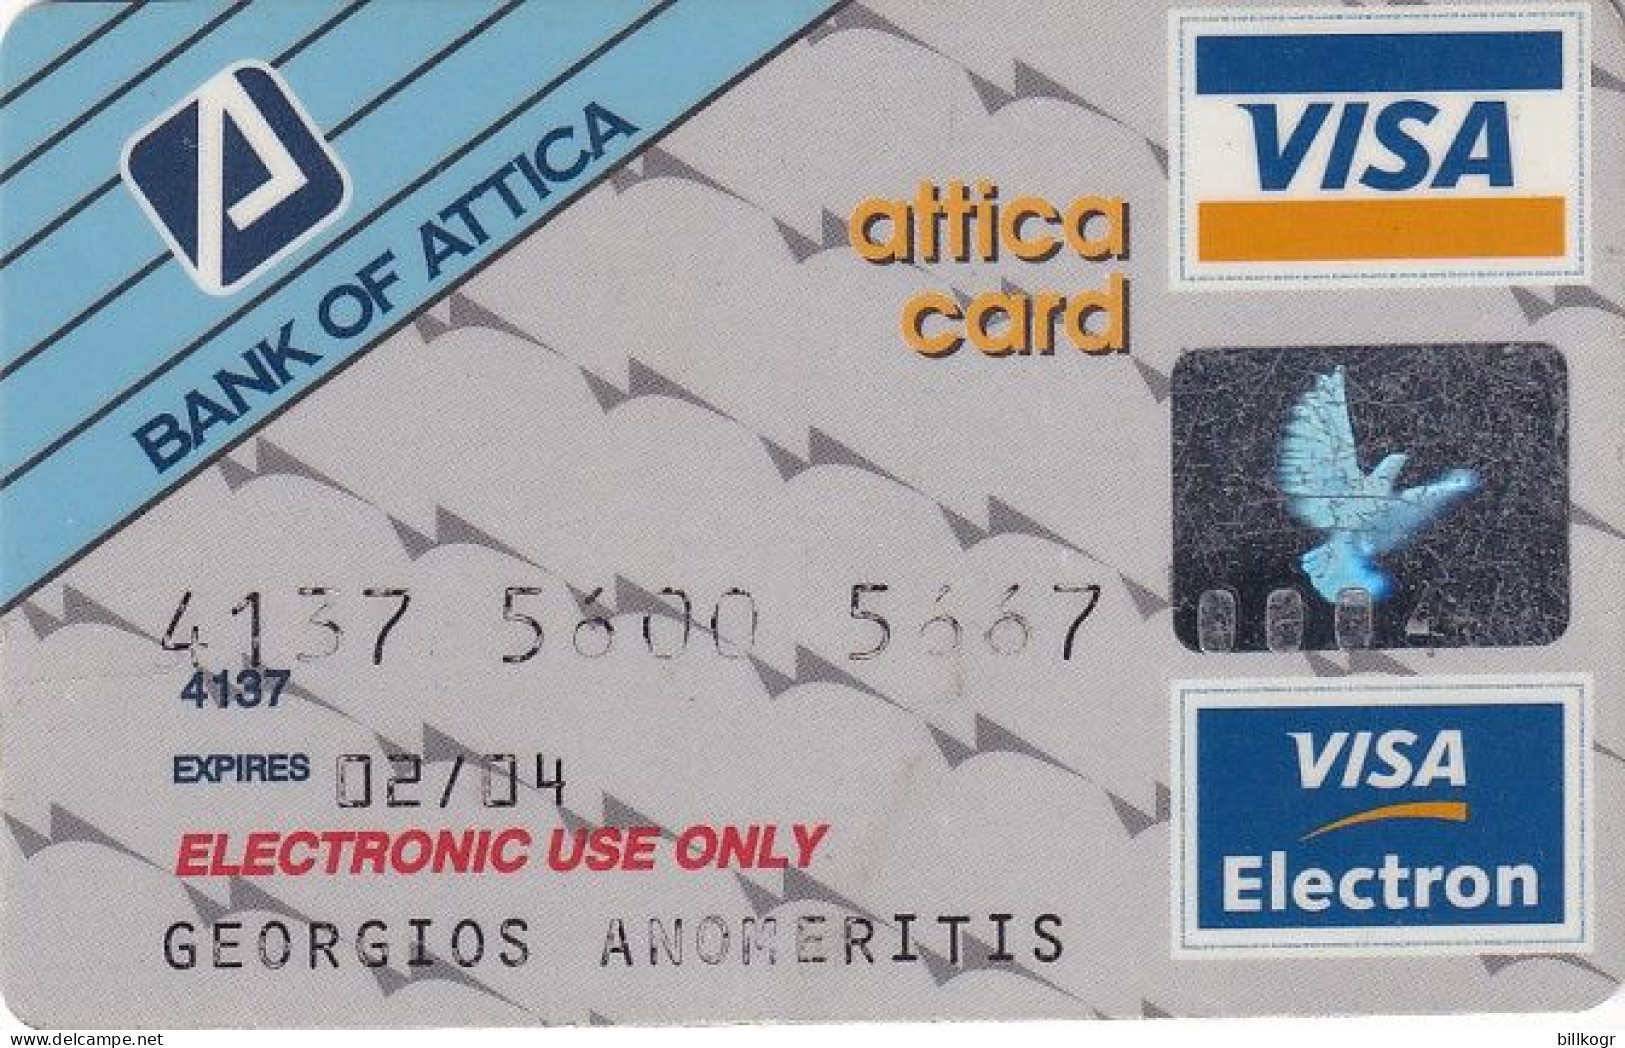 GREECE - Attica Bank Visa, 04/99, Used - Credit Cards (Exp. Date Min. 10 Years)